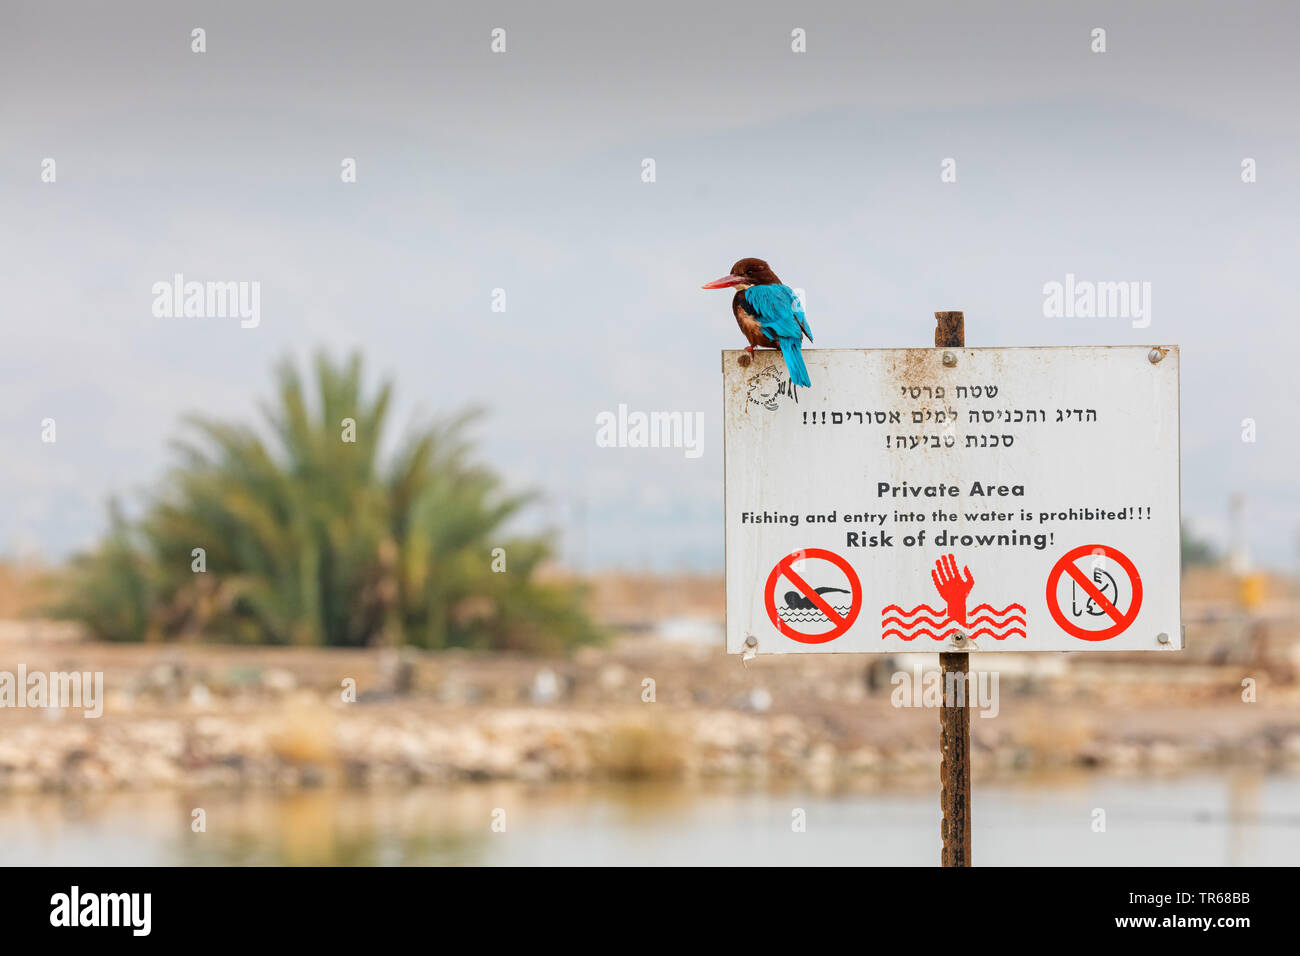 white-throated kingfisher, White-breasted Kingfisher, River Kingfisher (Halcyon smyrnensis), sitting on a sign no fishing, Israel Stock Photo